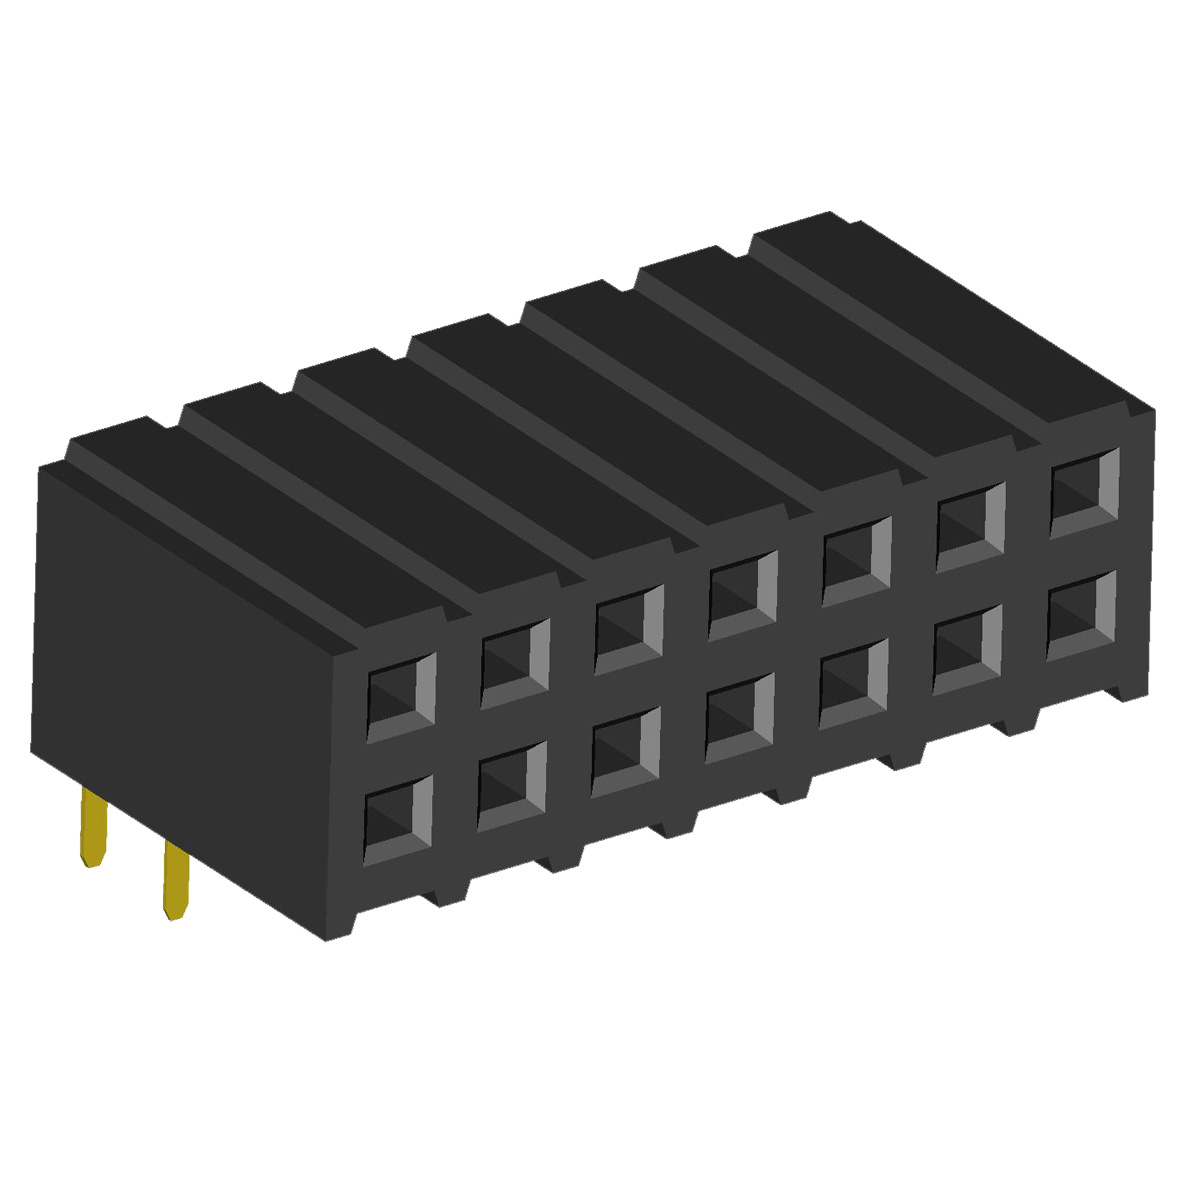 2207R-XXG (PBD2-XXR) series, sockets, angled, double-row, for mounting into holes, pitch 2,0x2,0 mm, 2x40 pins